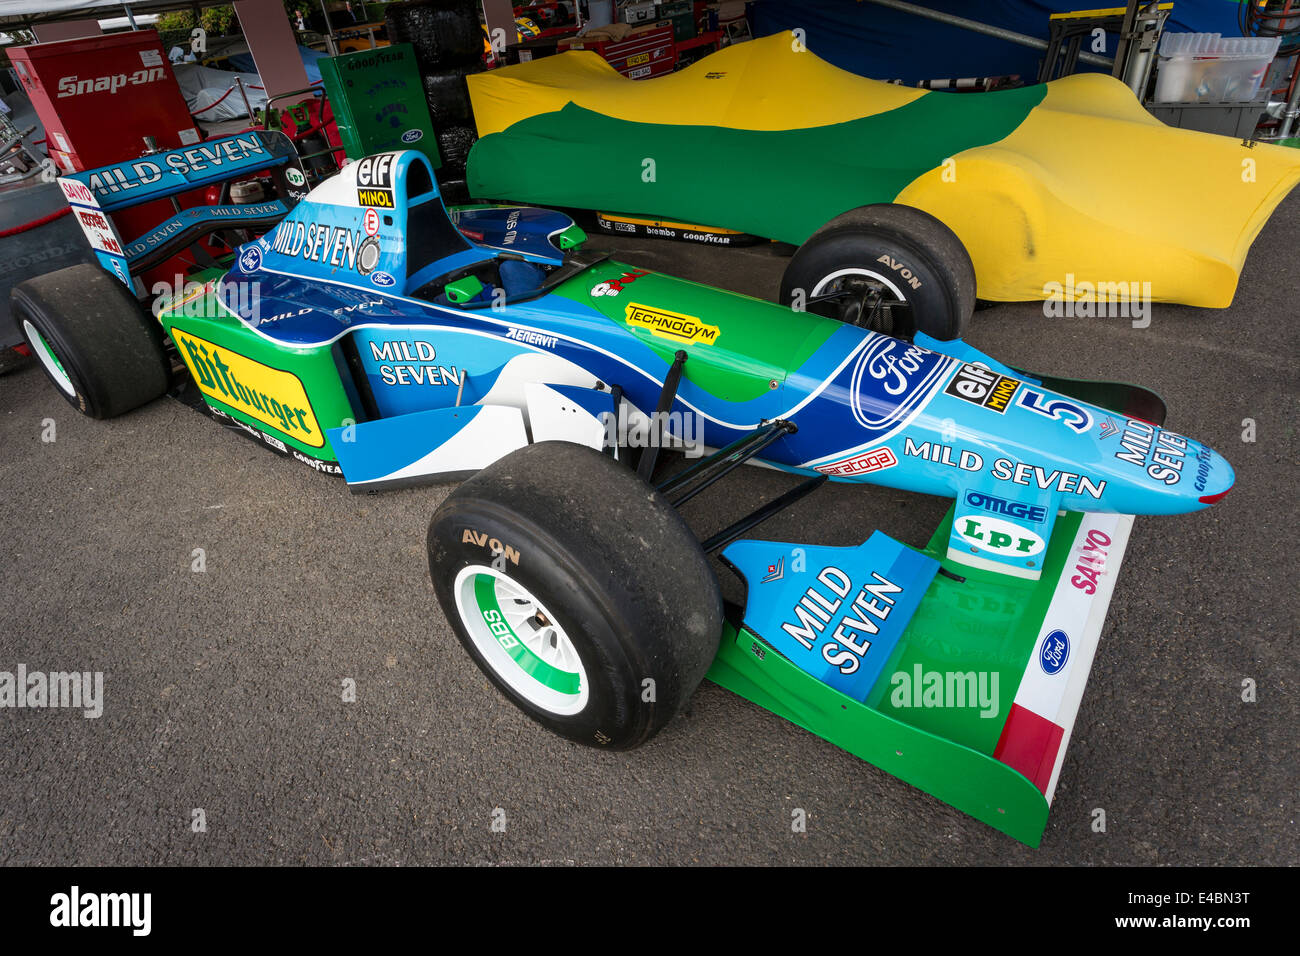 Michael Schumacher's 1994 Benetton-Ford B194-8 F1 car in the paddock at the  2014 Goodwood Festival of Speed, Sussex, UK Stock Photo - Alamy